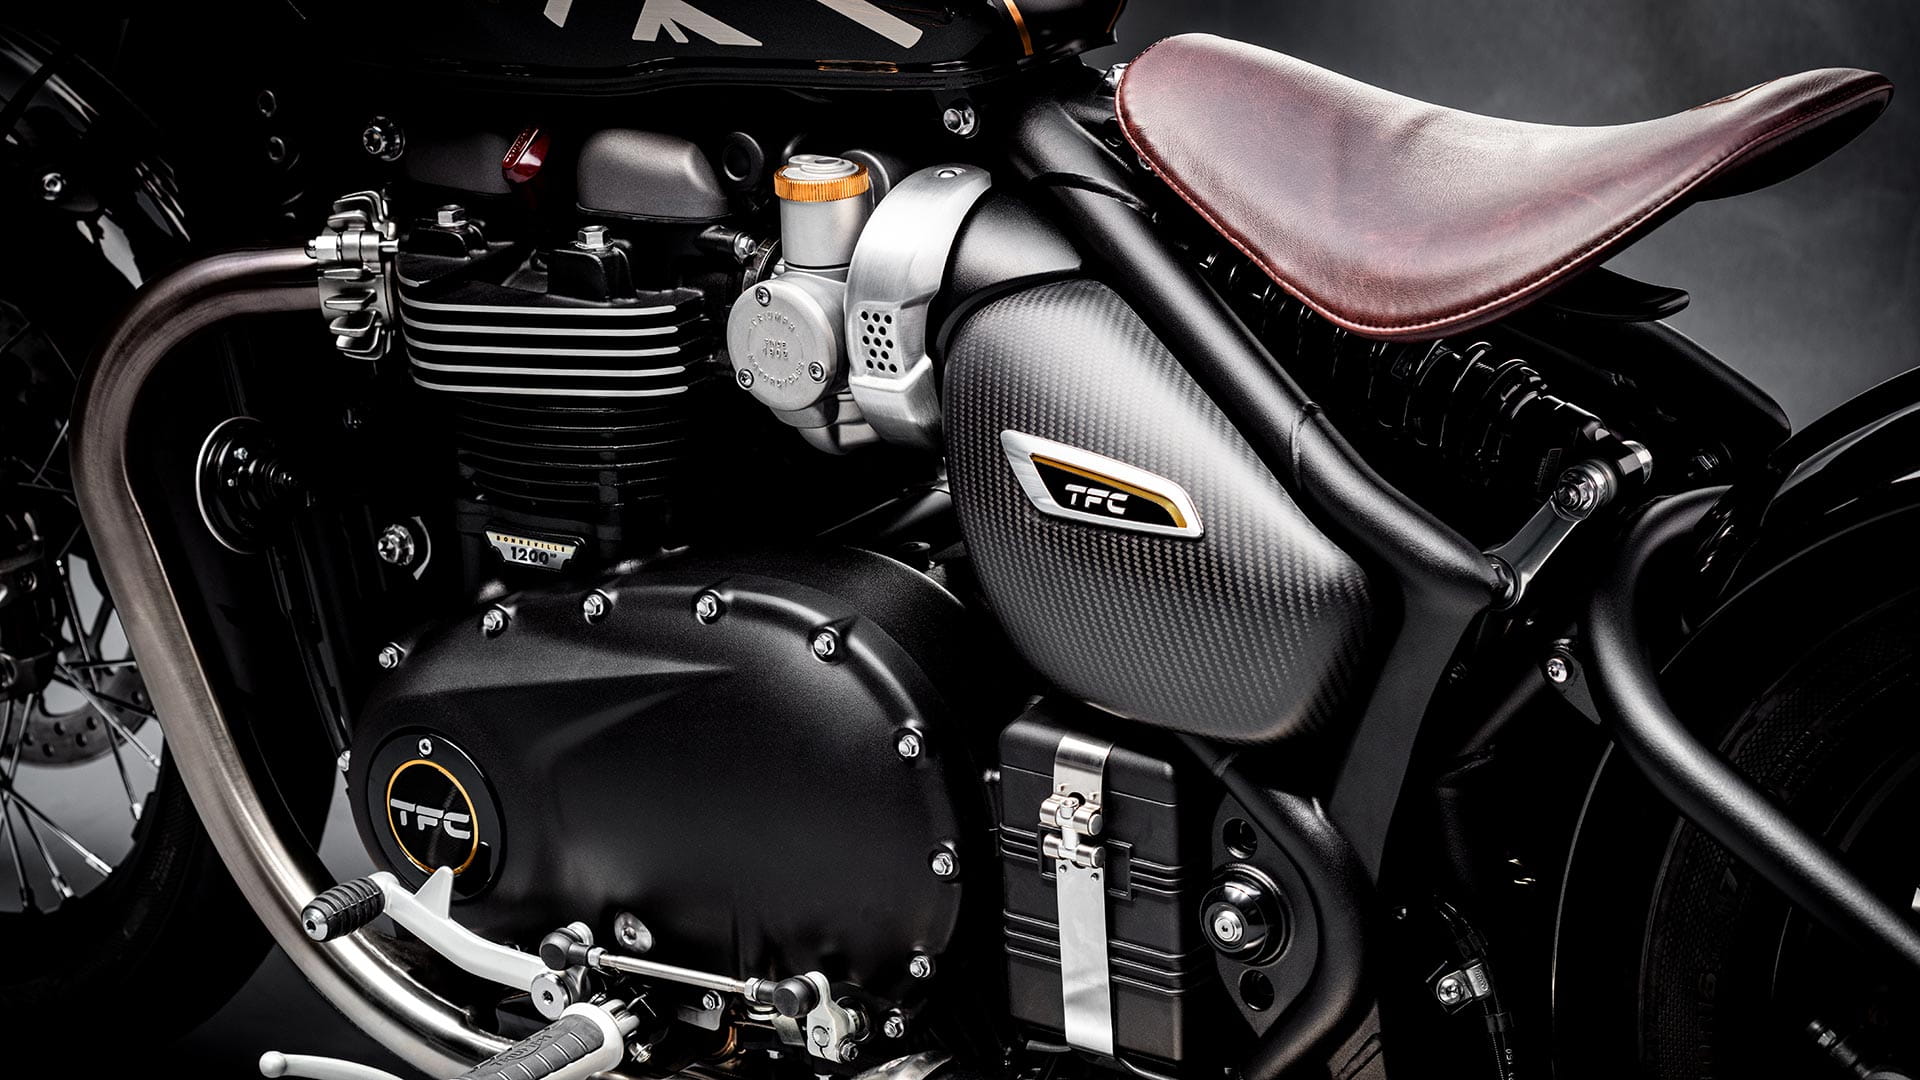 Close-up shot of the Triumph Bobber TFC's powerful engine